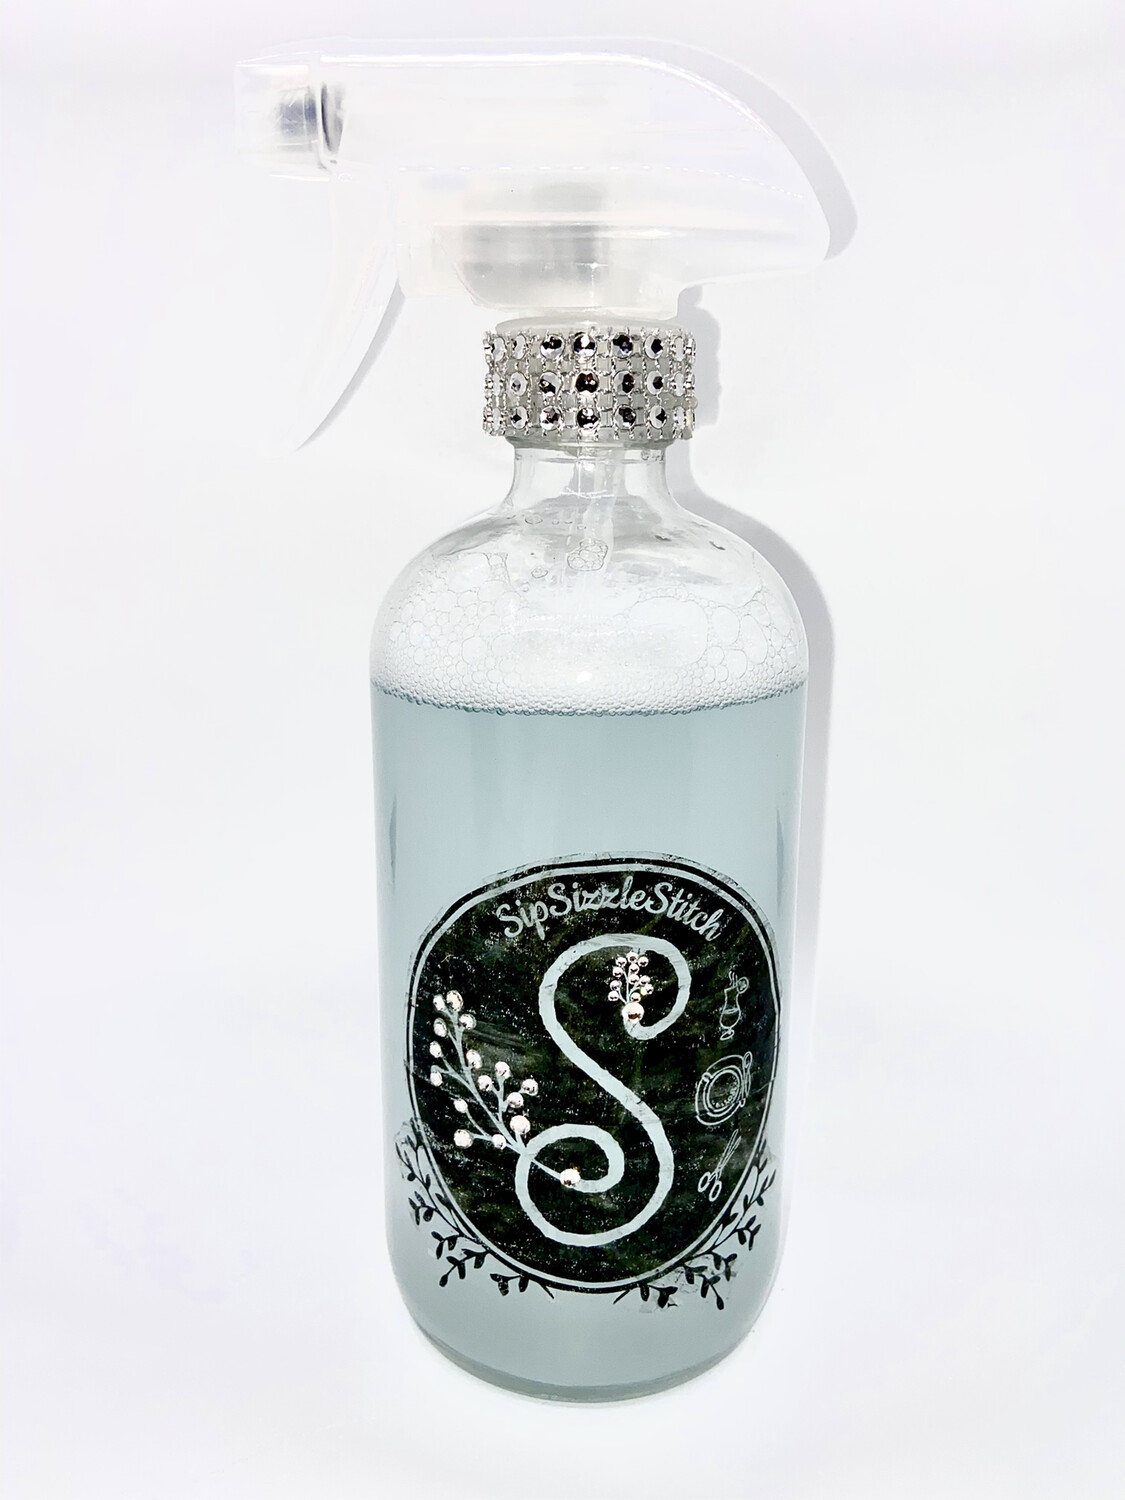 16 Oz Home Cleaner in GLASS Spray